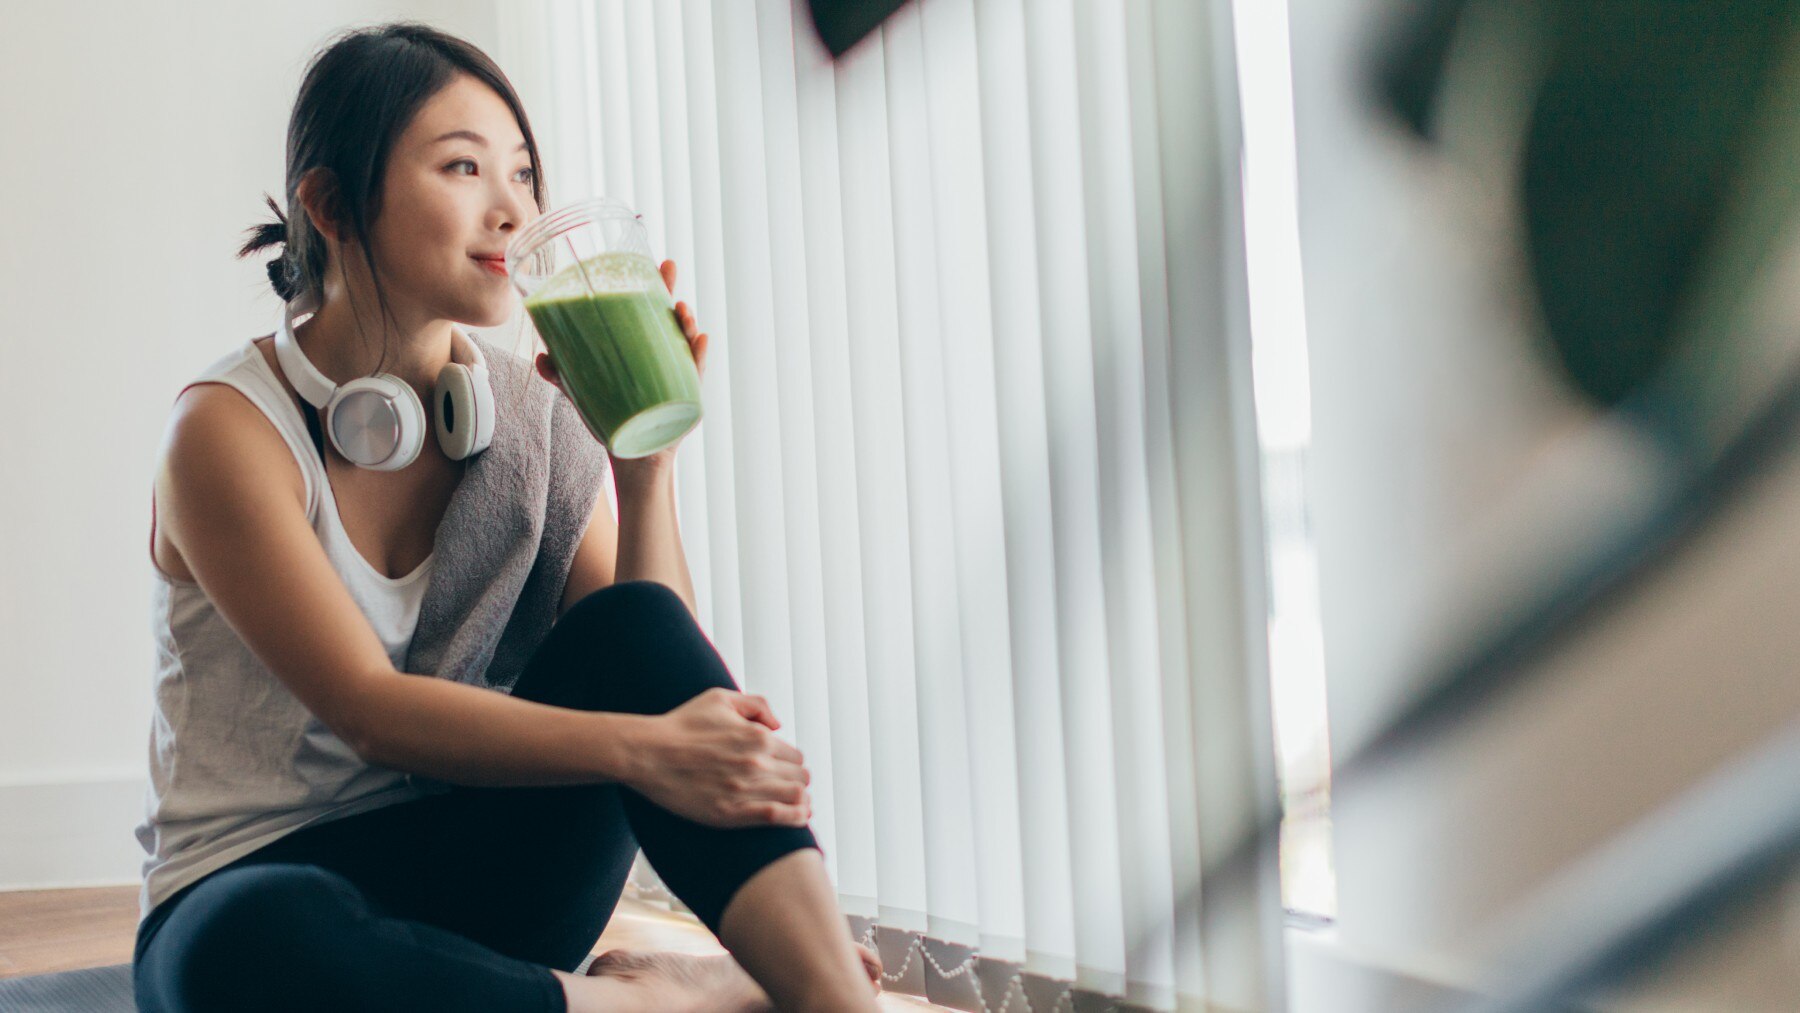 A woman drinking green smoothie